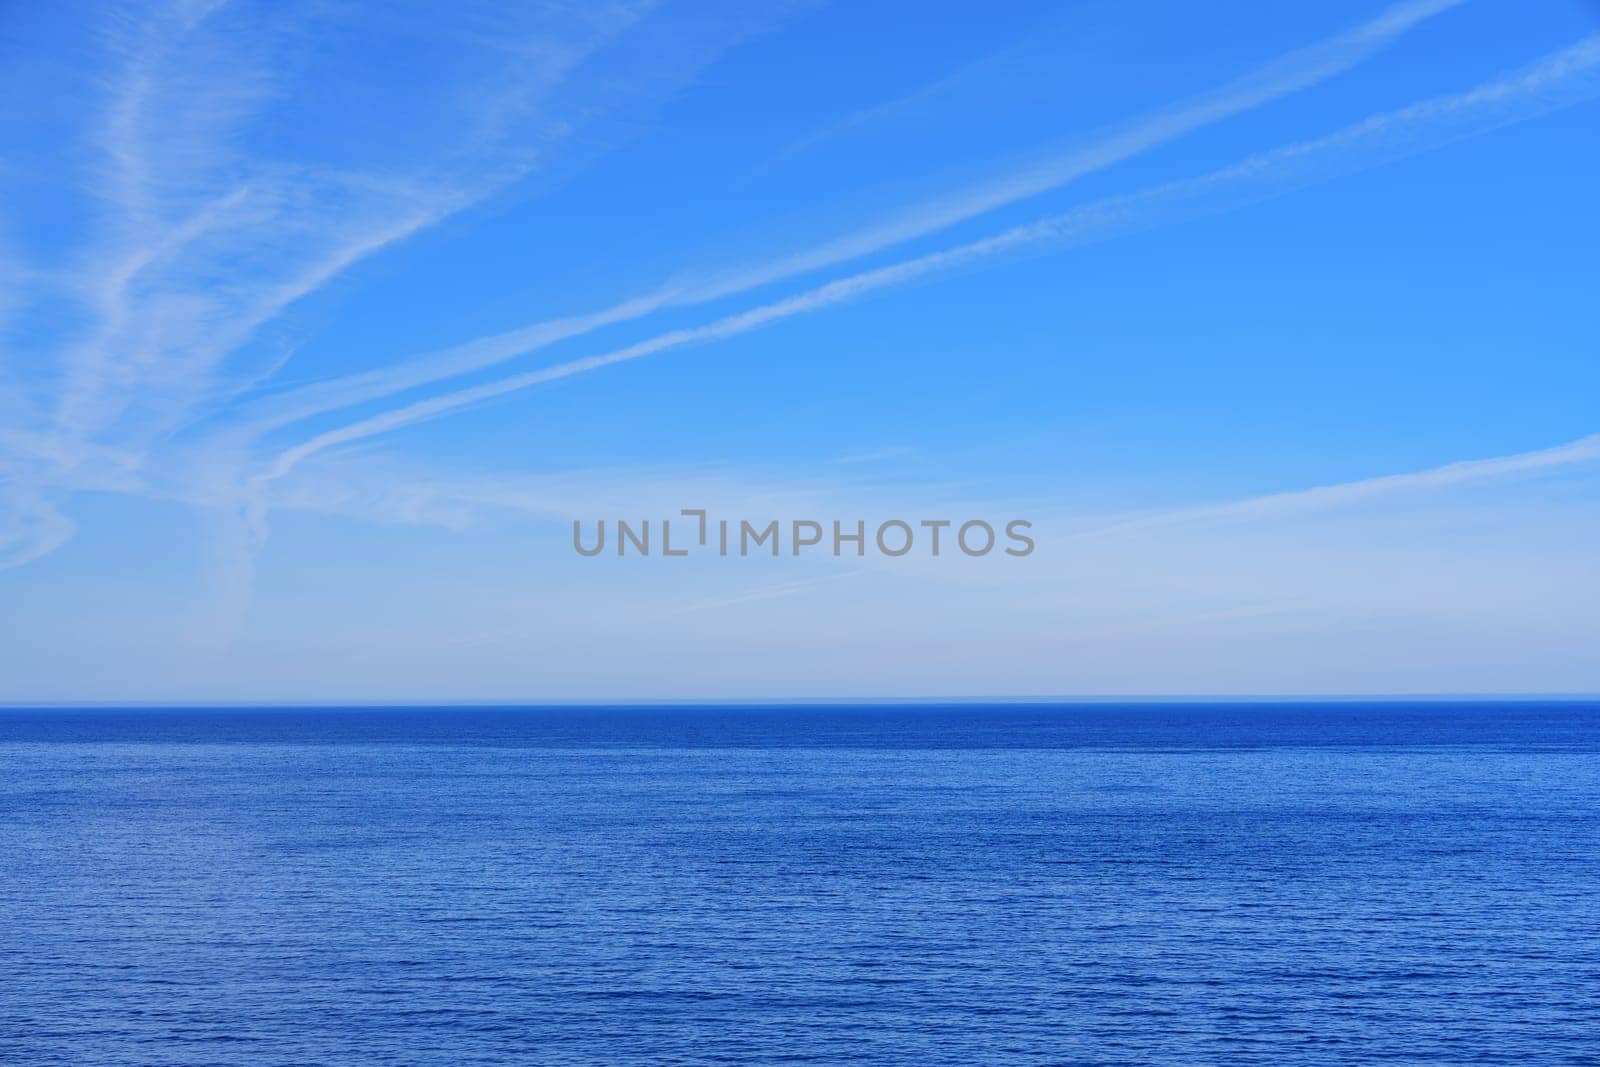 Tranquil seascape with a clear blue sky stretching to the horizon, perfect for promotional advertisements and travel brochures. The serene scene evokes a sense of peace and relaxation.